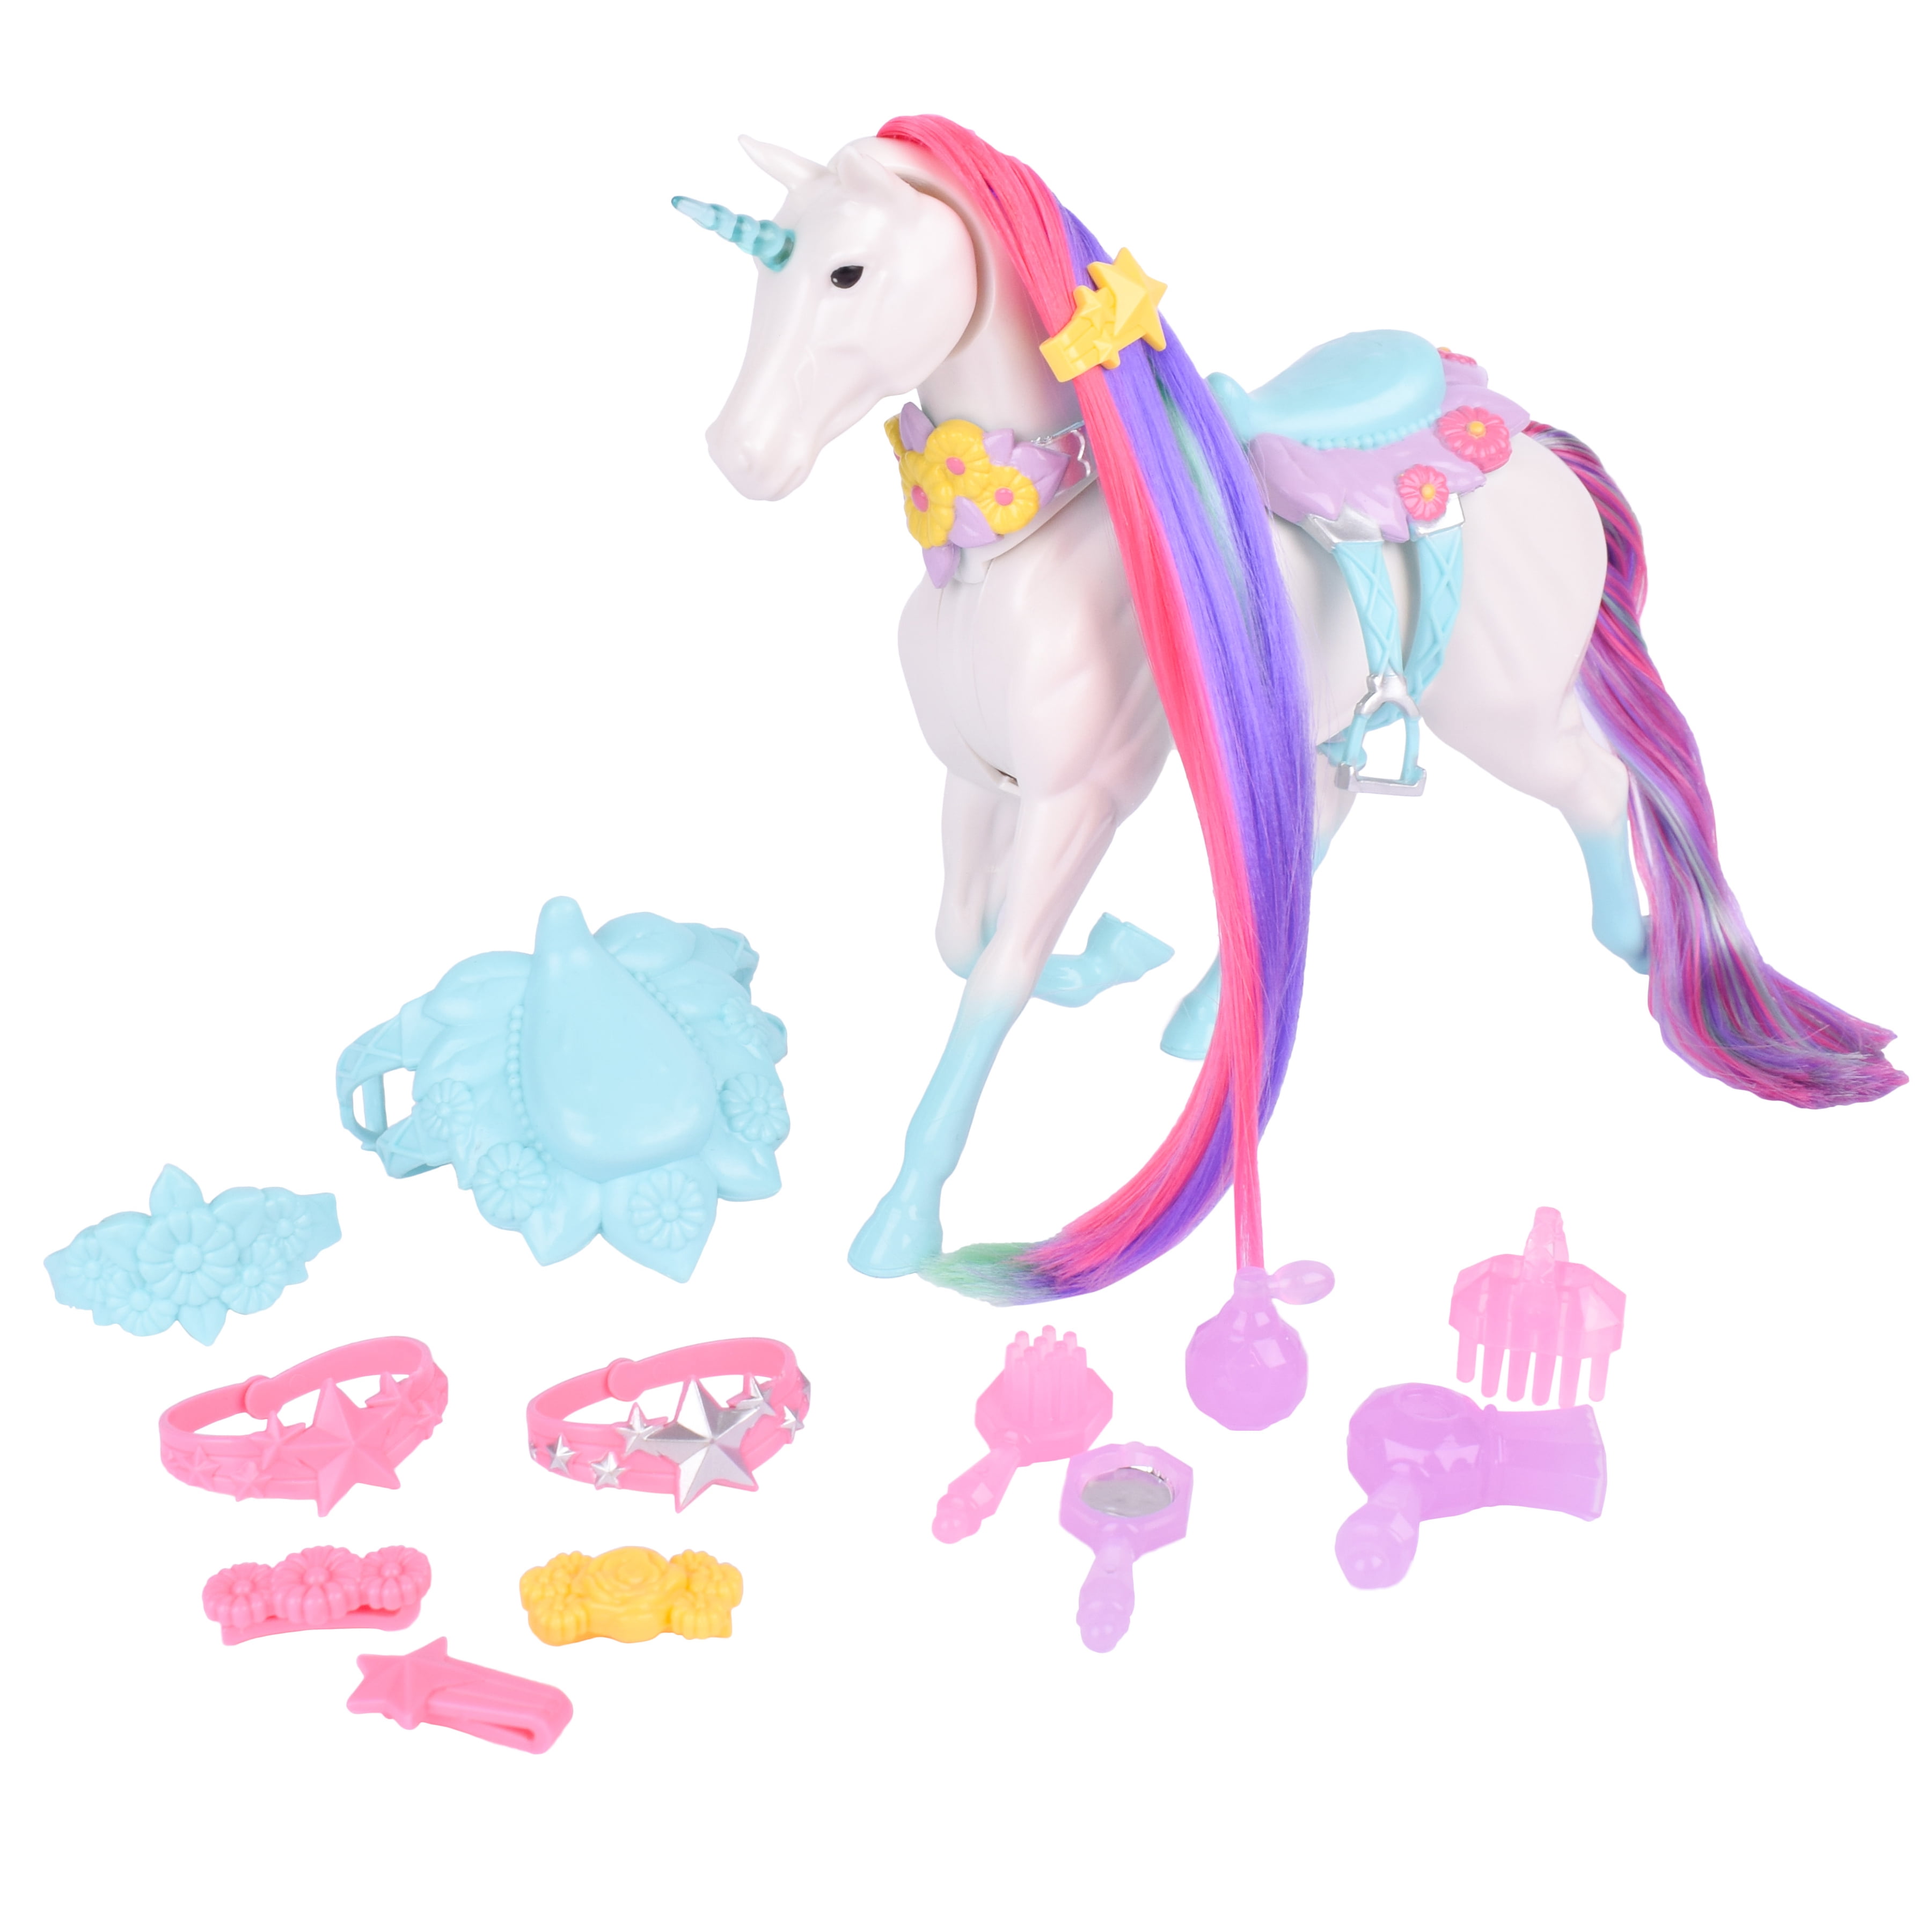 Blue Ribbon Champions Unicorn Grooming Set - Fantasy Toy Horse with Sounds and 12 Grooming Accessories | Children Ages 3+